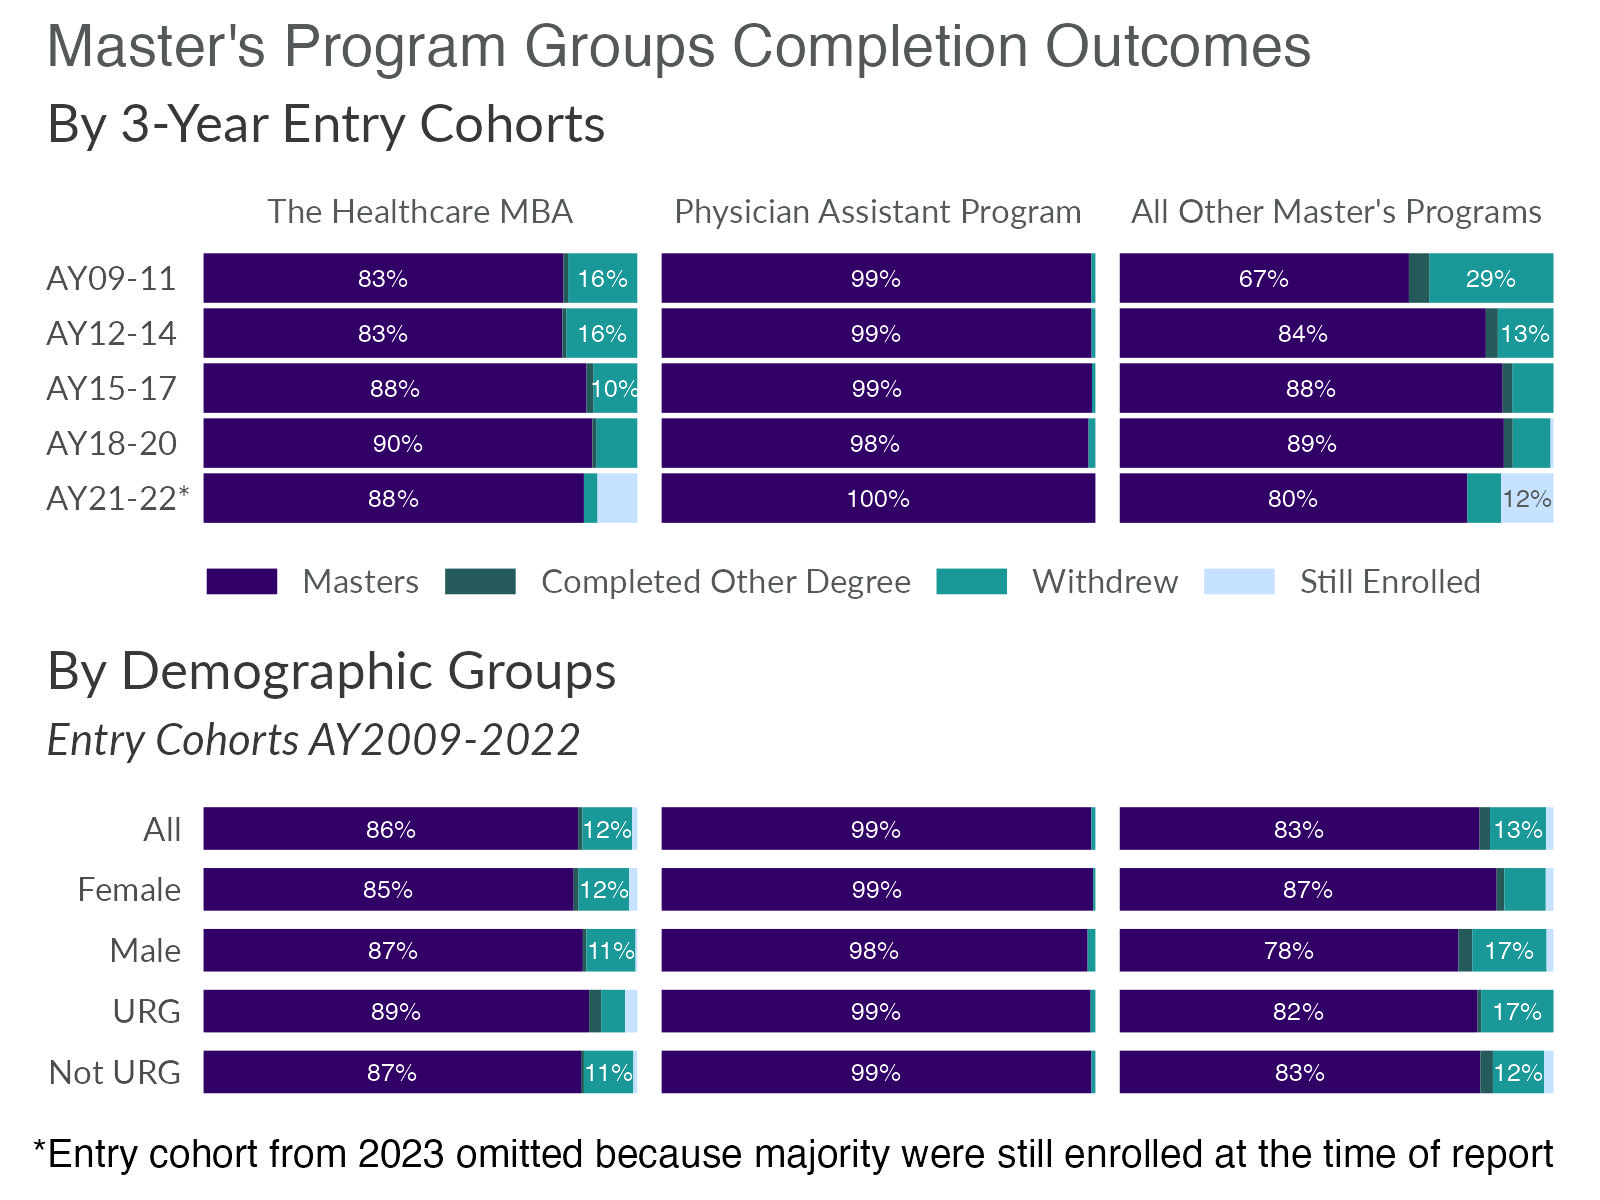 School of Medicine master's degree level summary of degree completion by master's degree groups for entry cohorts from academic year 2009 through 2022 by three-year entry cohorts and demographic groups.